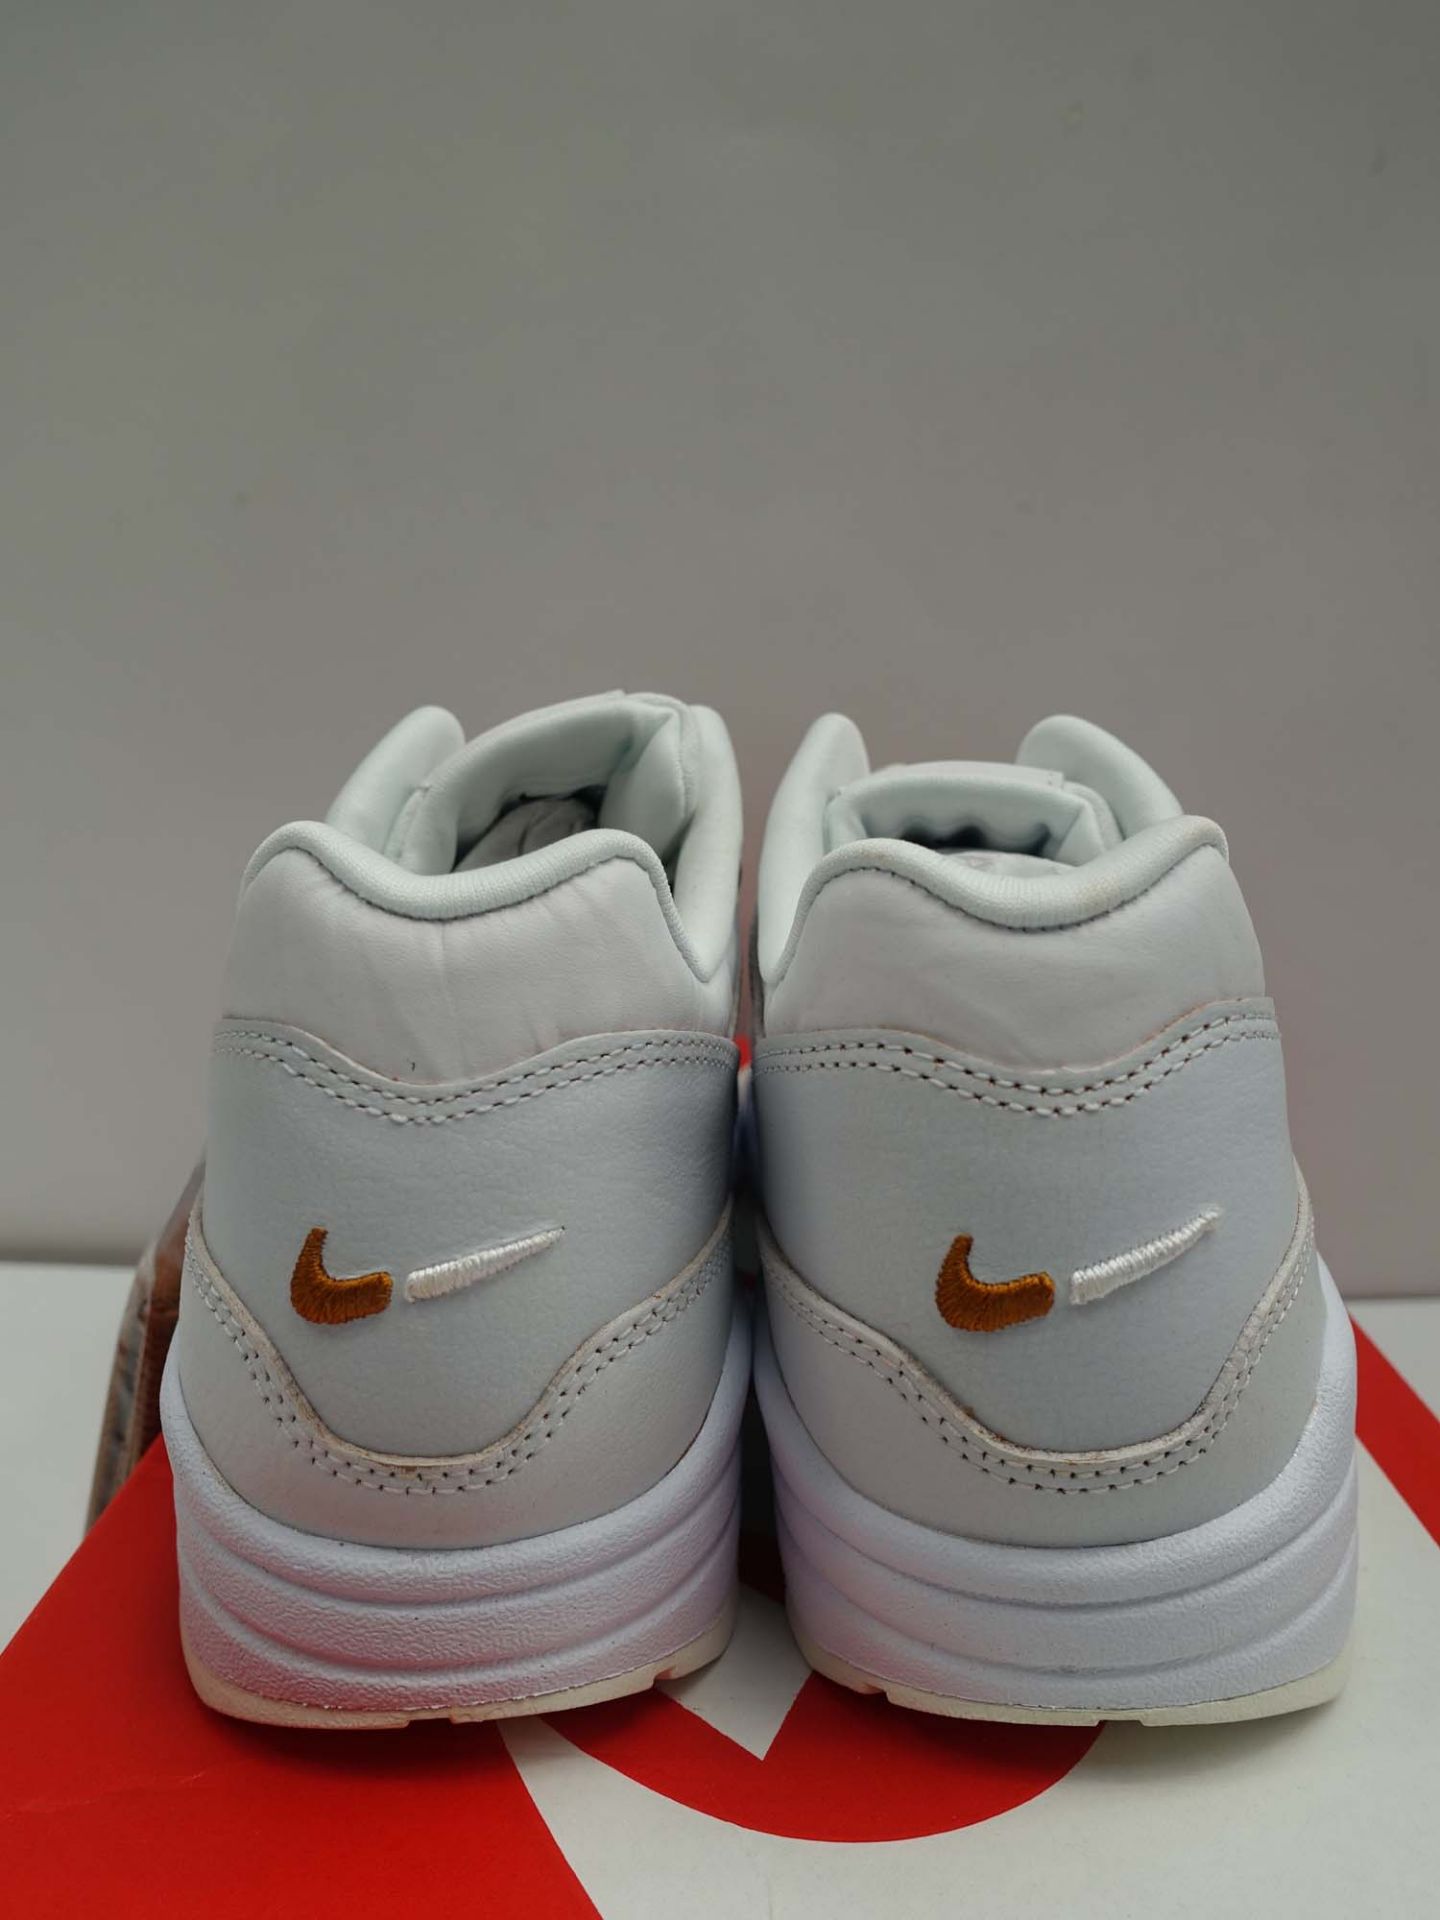 Nike Air Max 1 womens trainers size 6 - Image 2 of 2